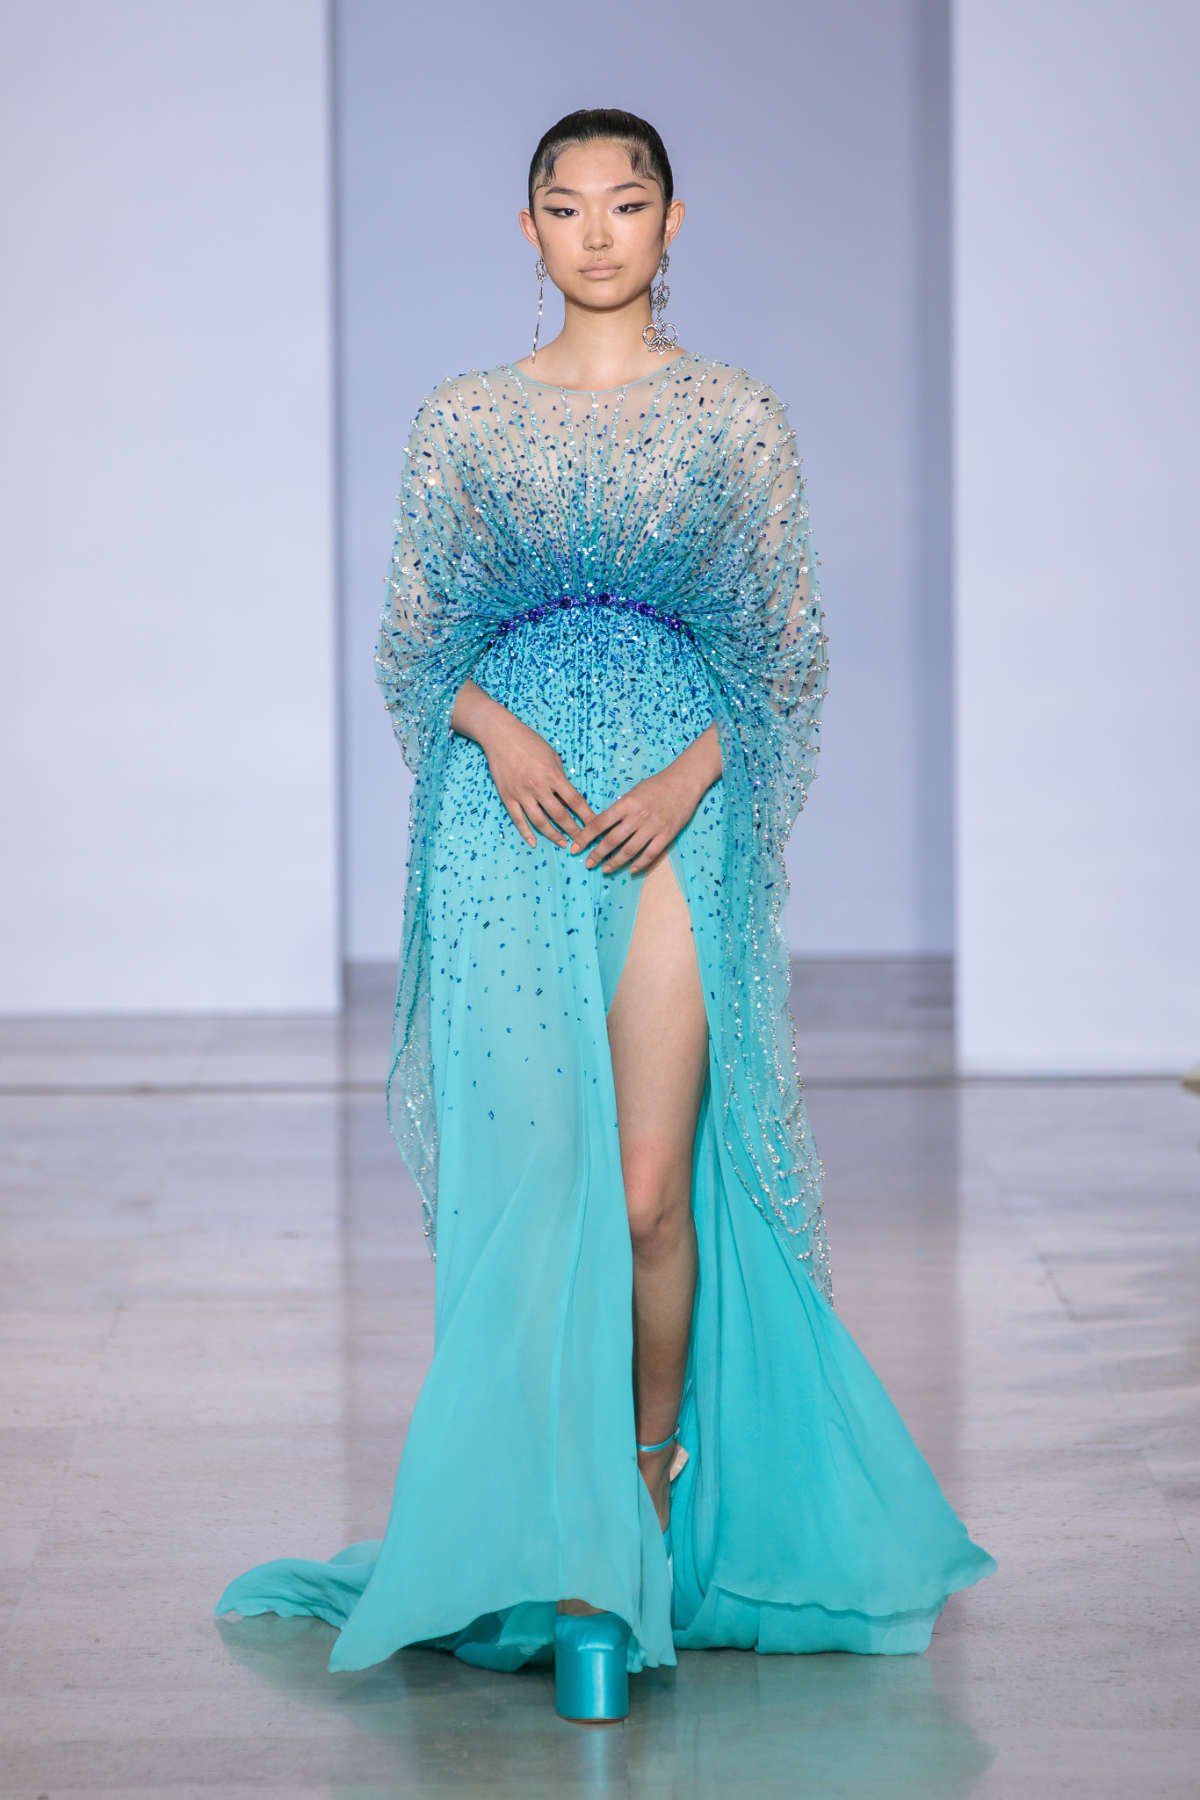 Maison Georges Hobeika Presents Its New Autumn-Winter 2022-2023 Couture Collection: Eternal Gifts